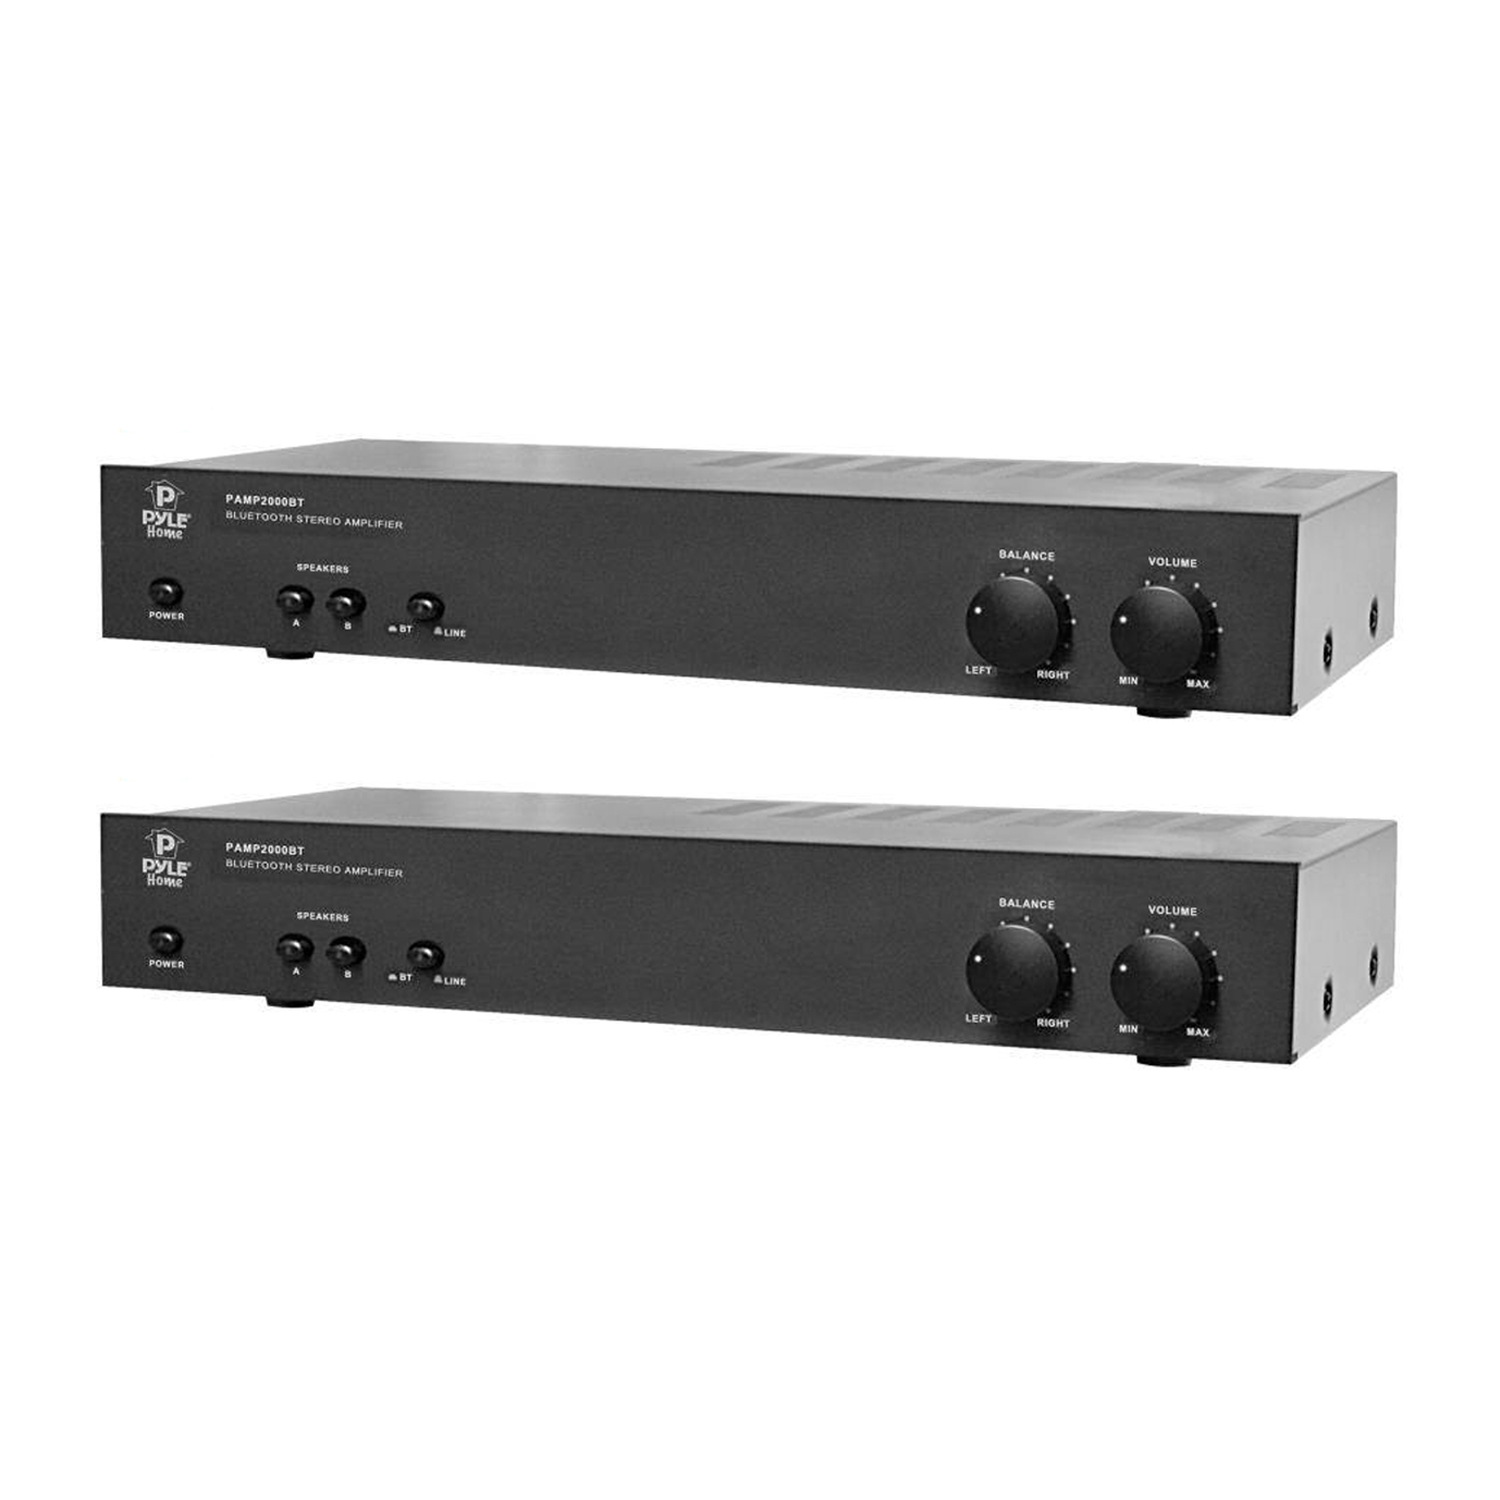 Pyle Home PAMP2000BT 240W Bluetooth Wireless Stereo Amplifier Receiver (2 Pack) - image 1 of 5